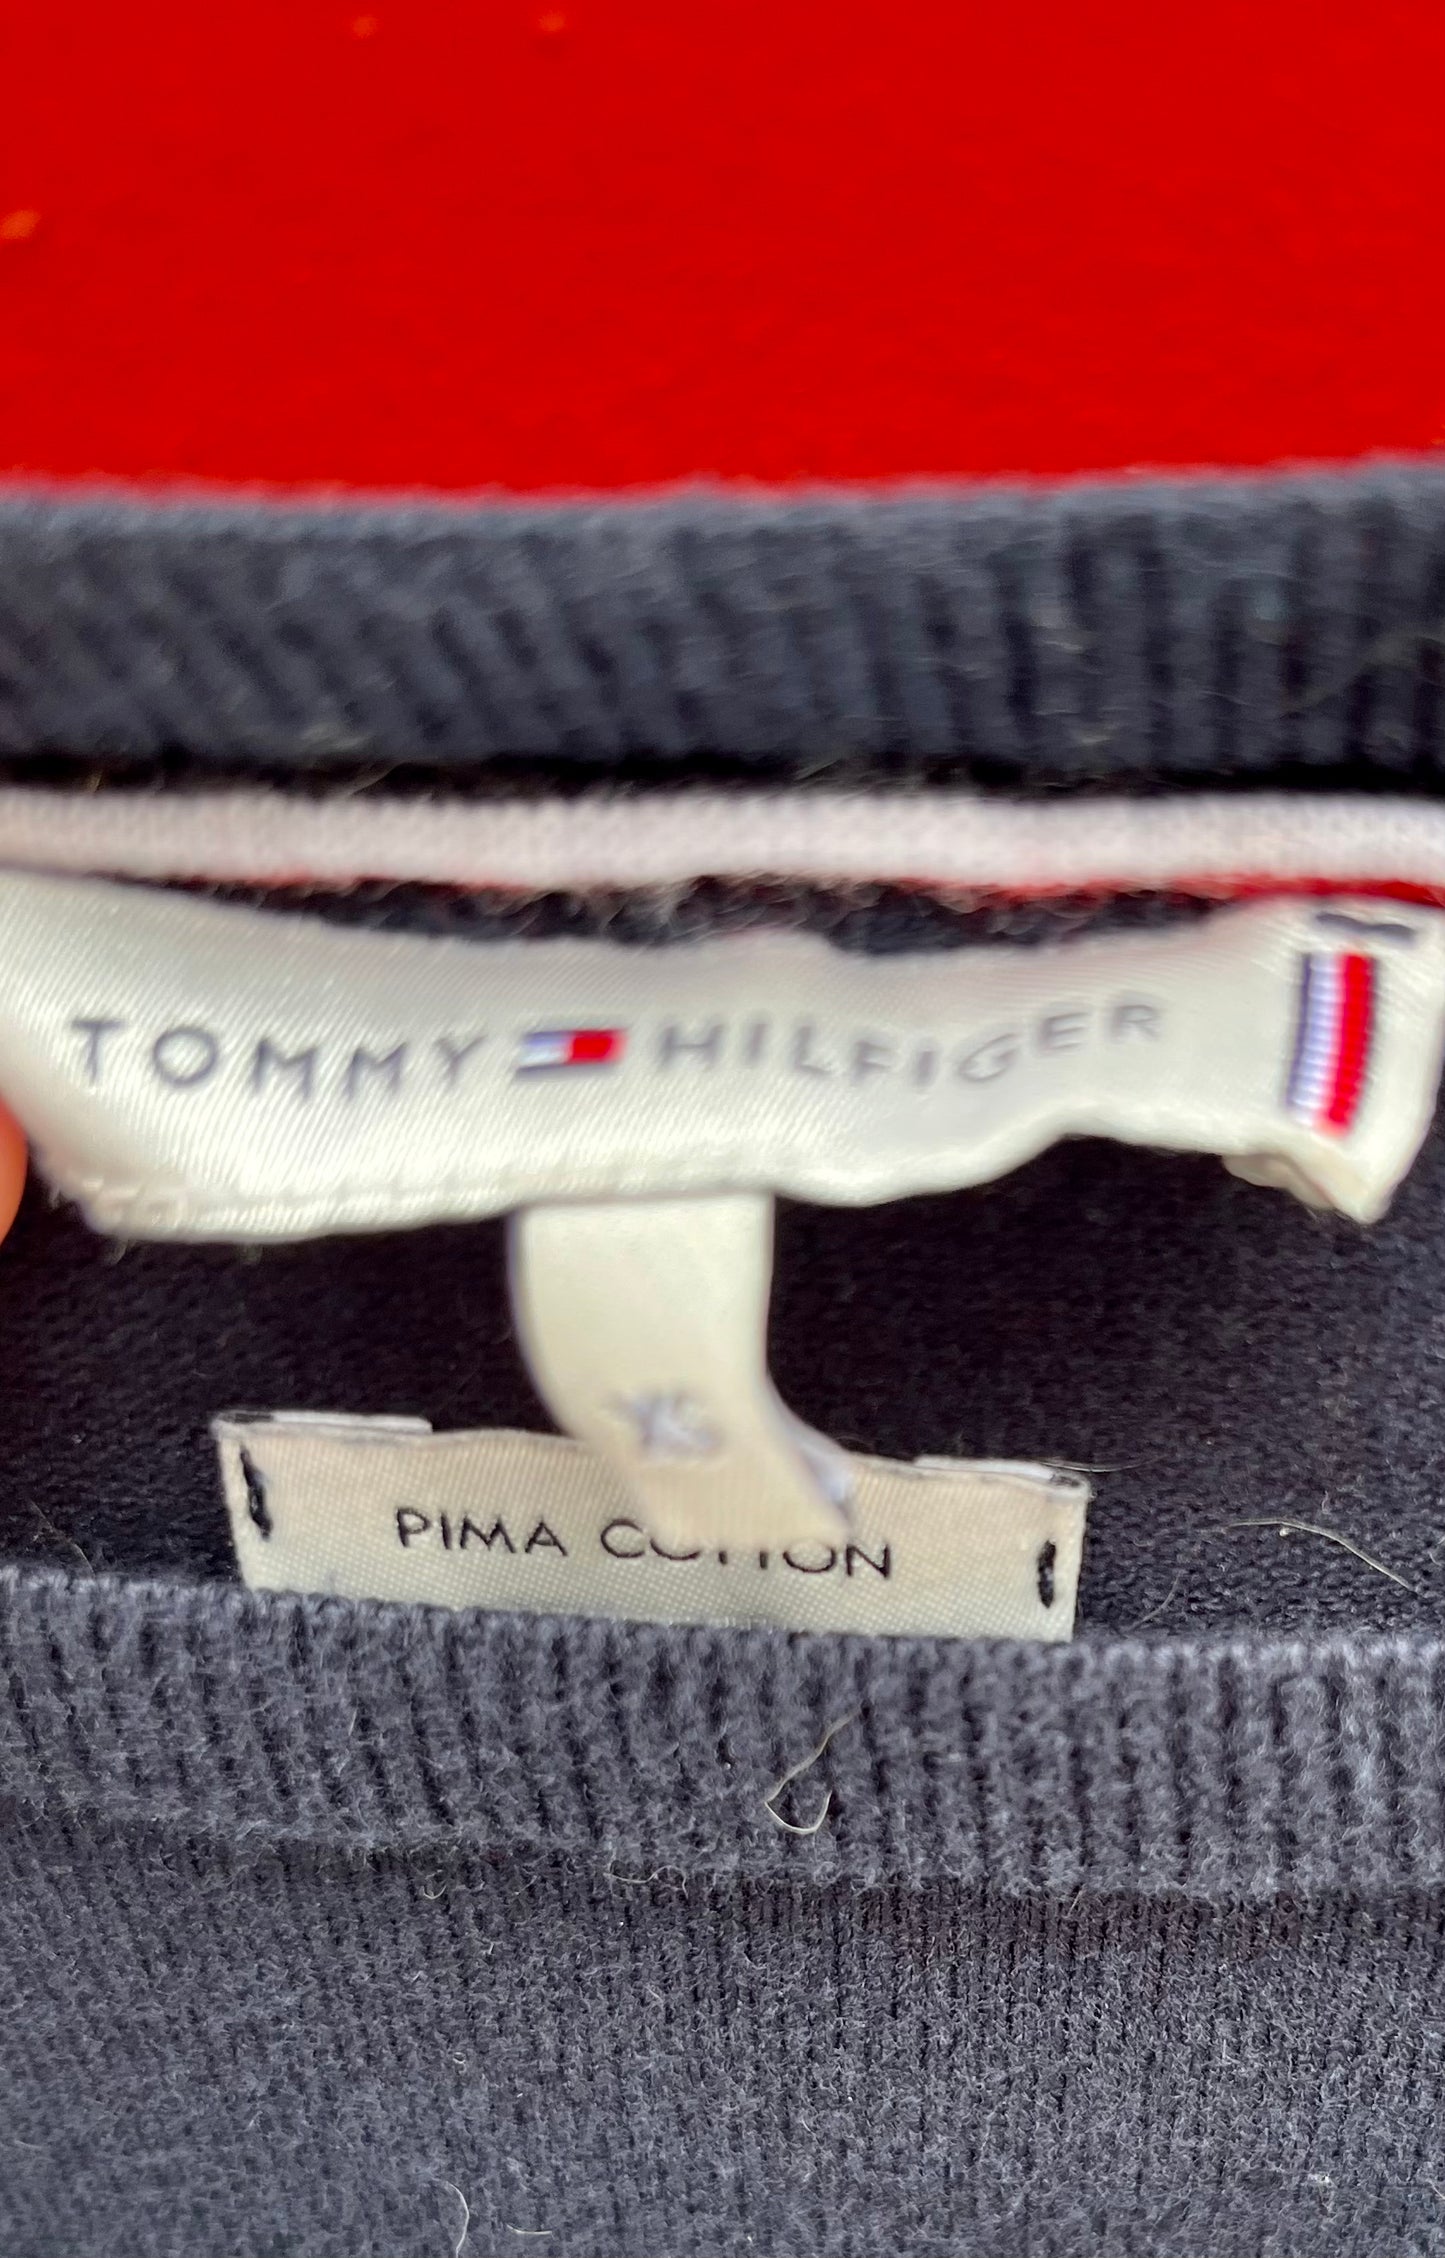 Le pull marinière, TOMMY HILFIGER, taille 34